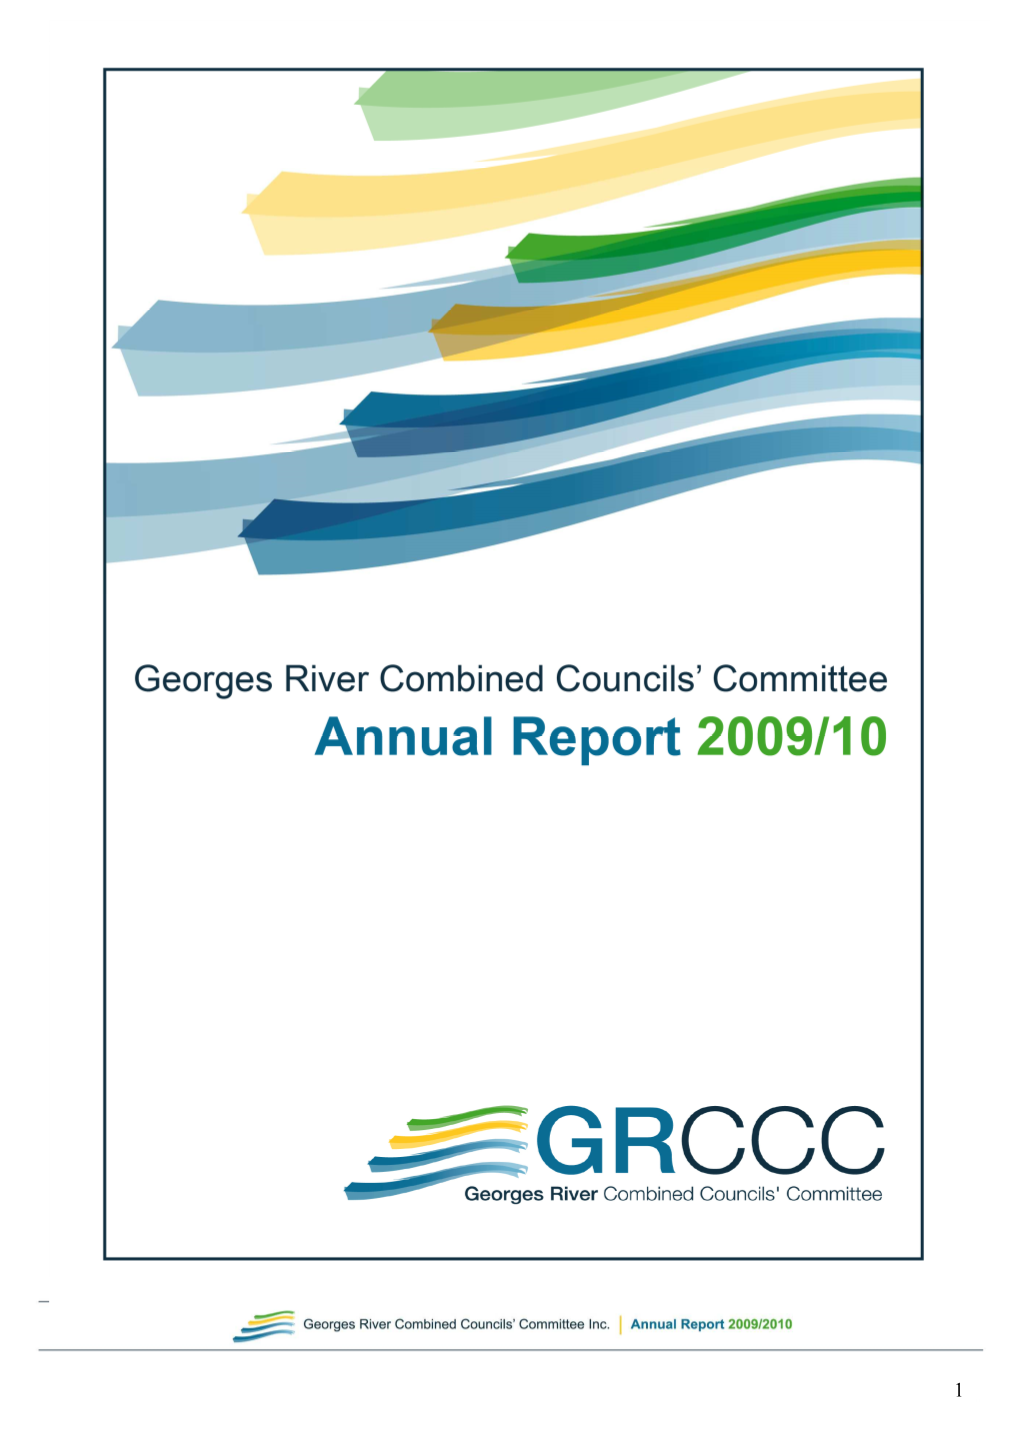 GRCCC Annual Report 2009 2010